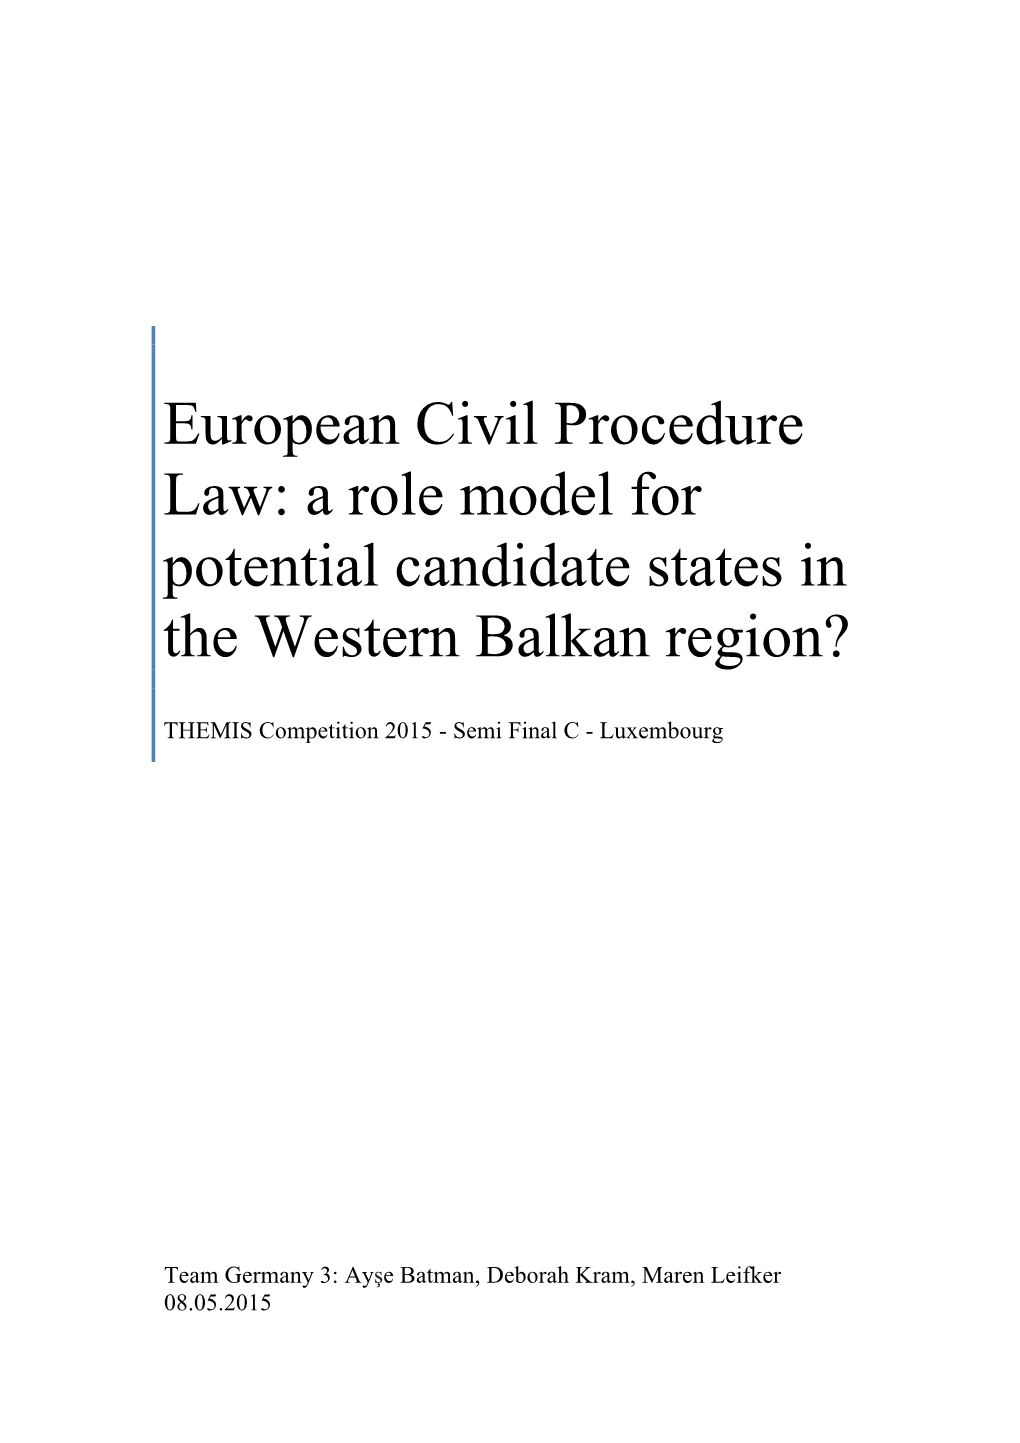 European Civil Procedure Law: a Role Model for Potential Candidate States